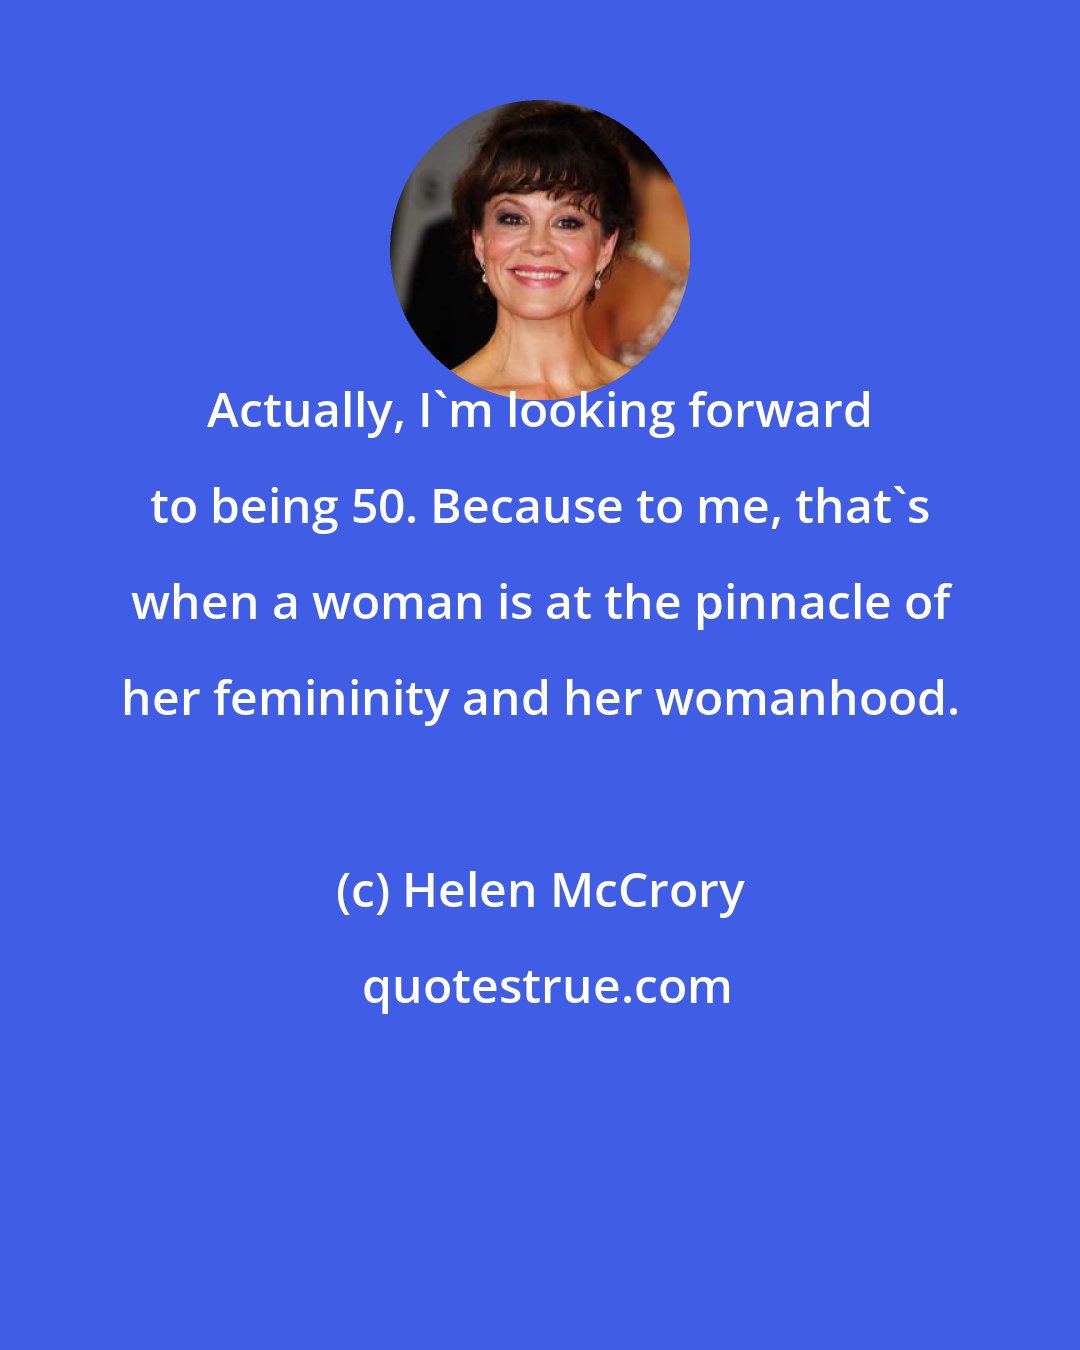 Helen McCrory: Actually, I'm looking forward to being 50. Because to me, that's when a woman is at the pinnacle of her femininity and her womanhood.